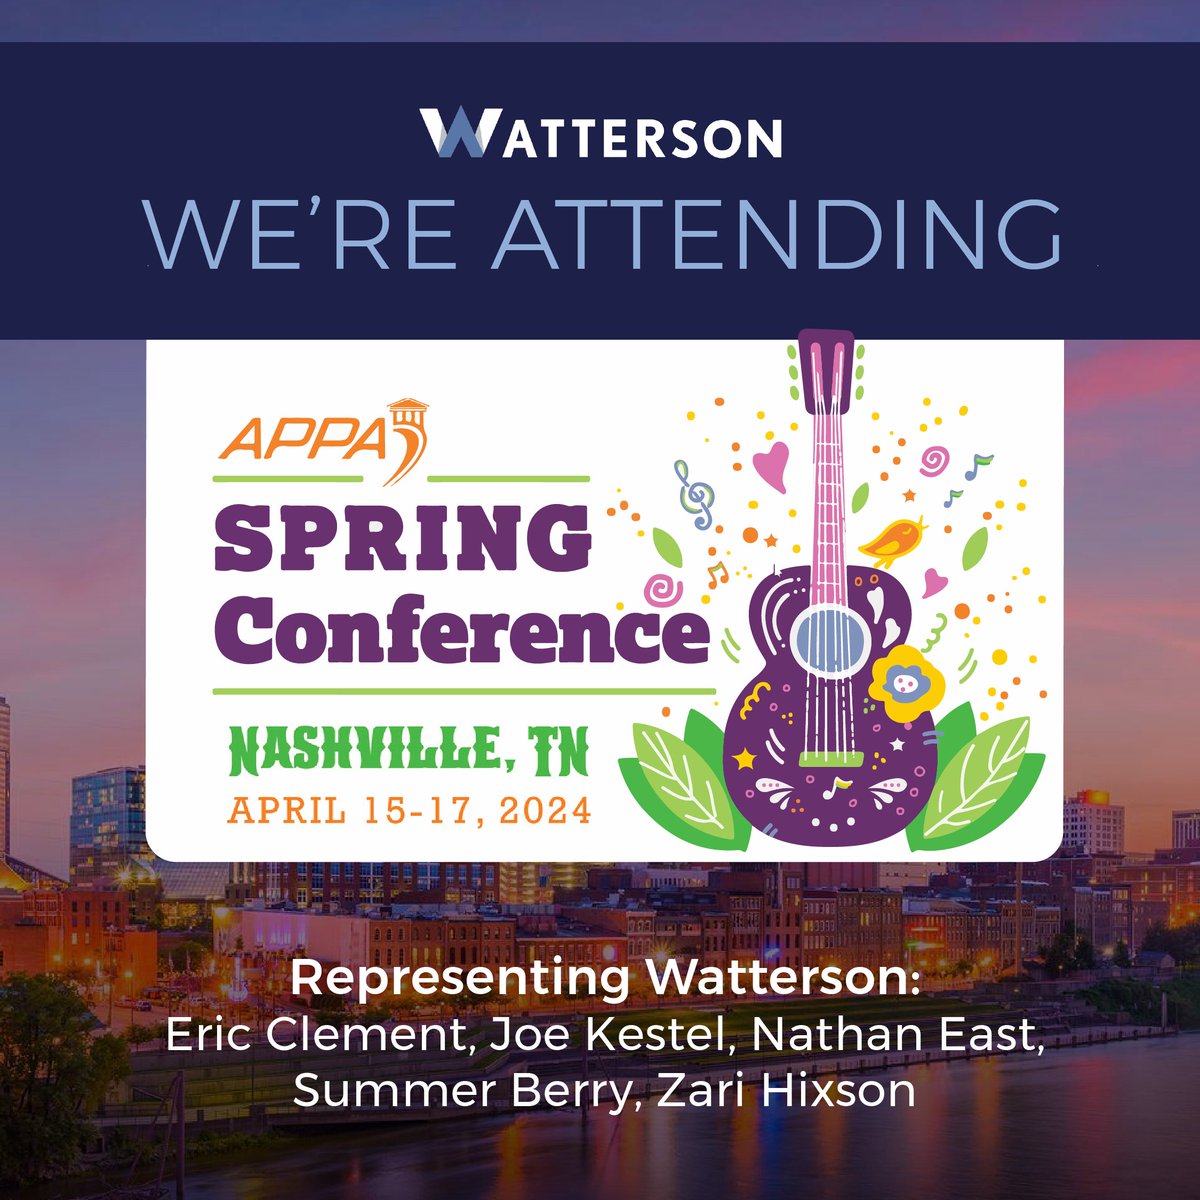 Nashville, here we come! The Watterson team is thrilled to join hundreds of peers at the APPA 2024 Spring Conference. Ready to learn, network, and innovate with educational facilities professionals. See you there! 

#APPA2024 #FacilitiesInnovation #TeamWatterson